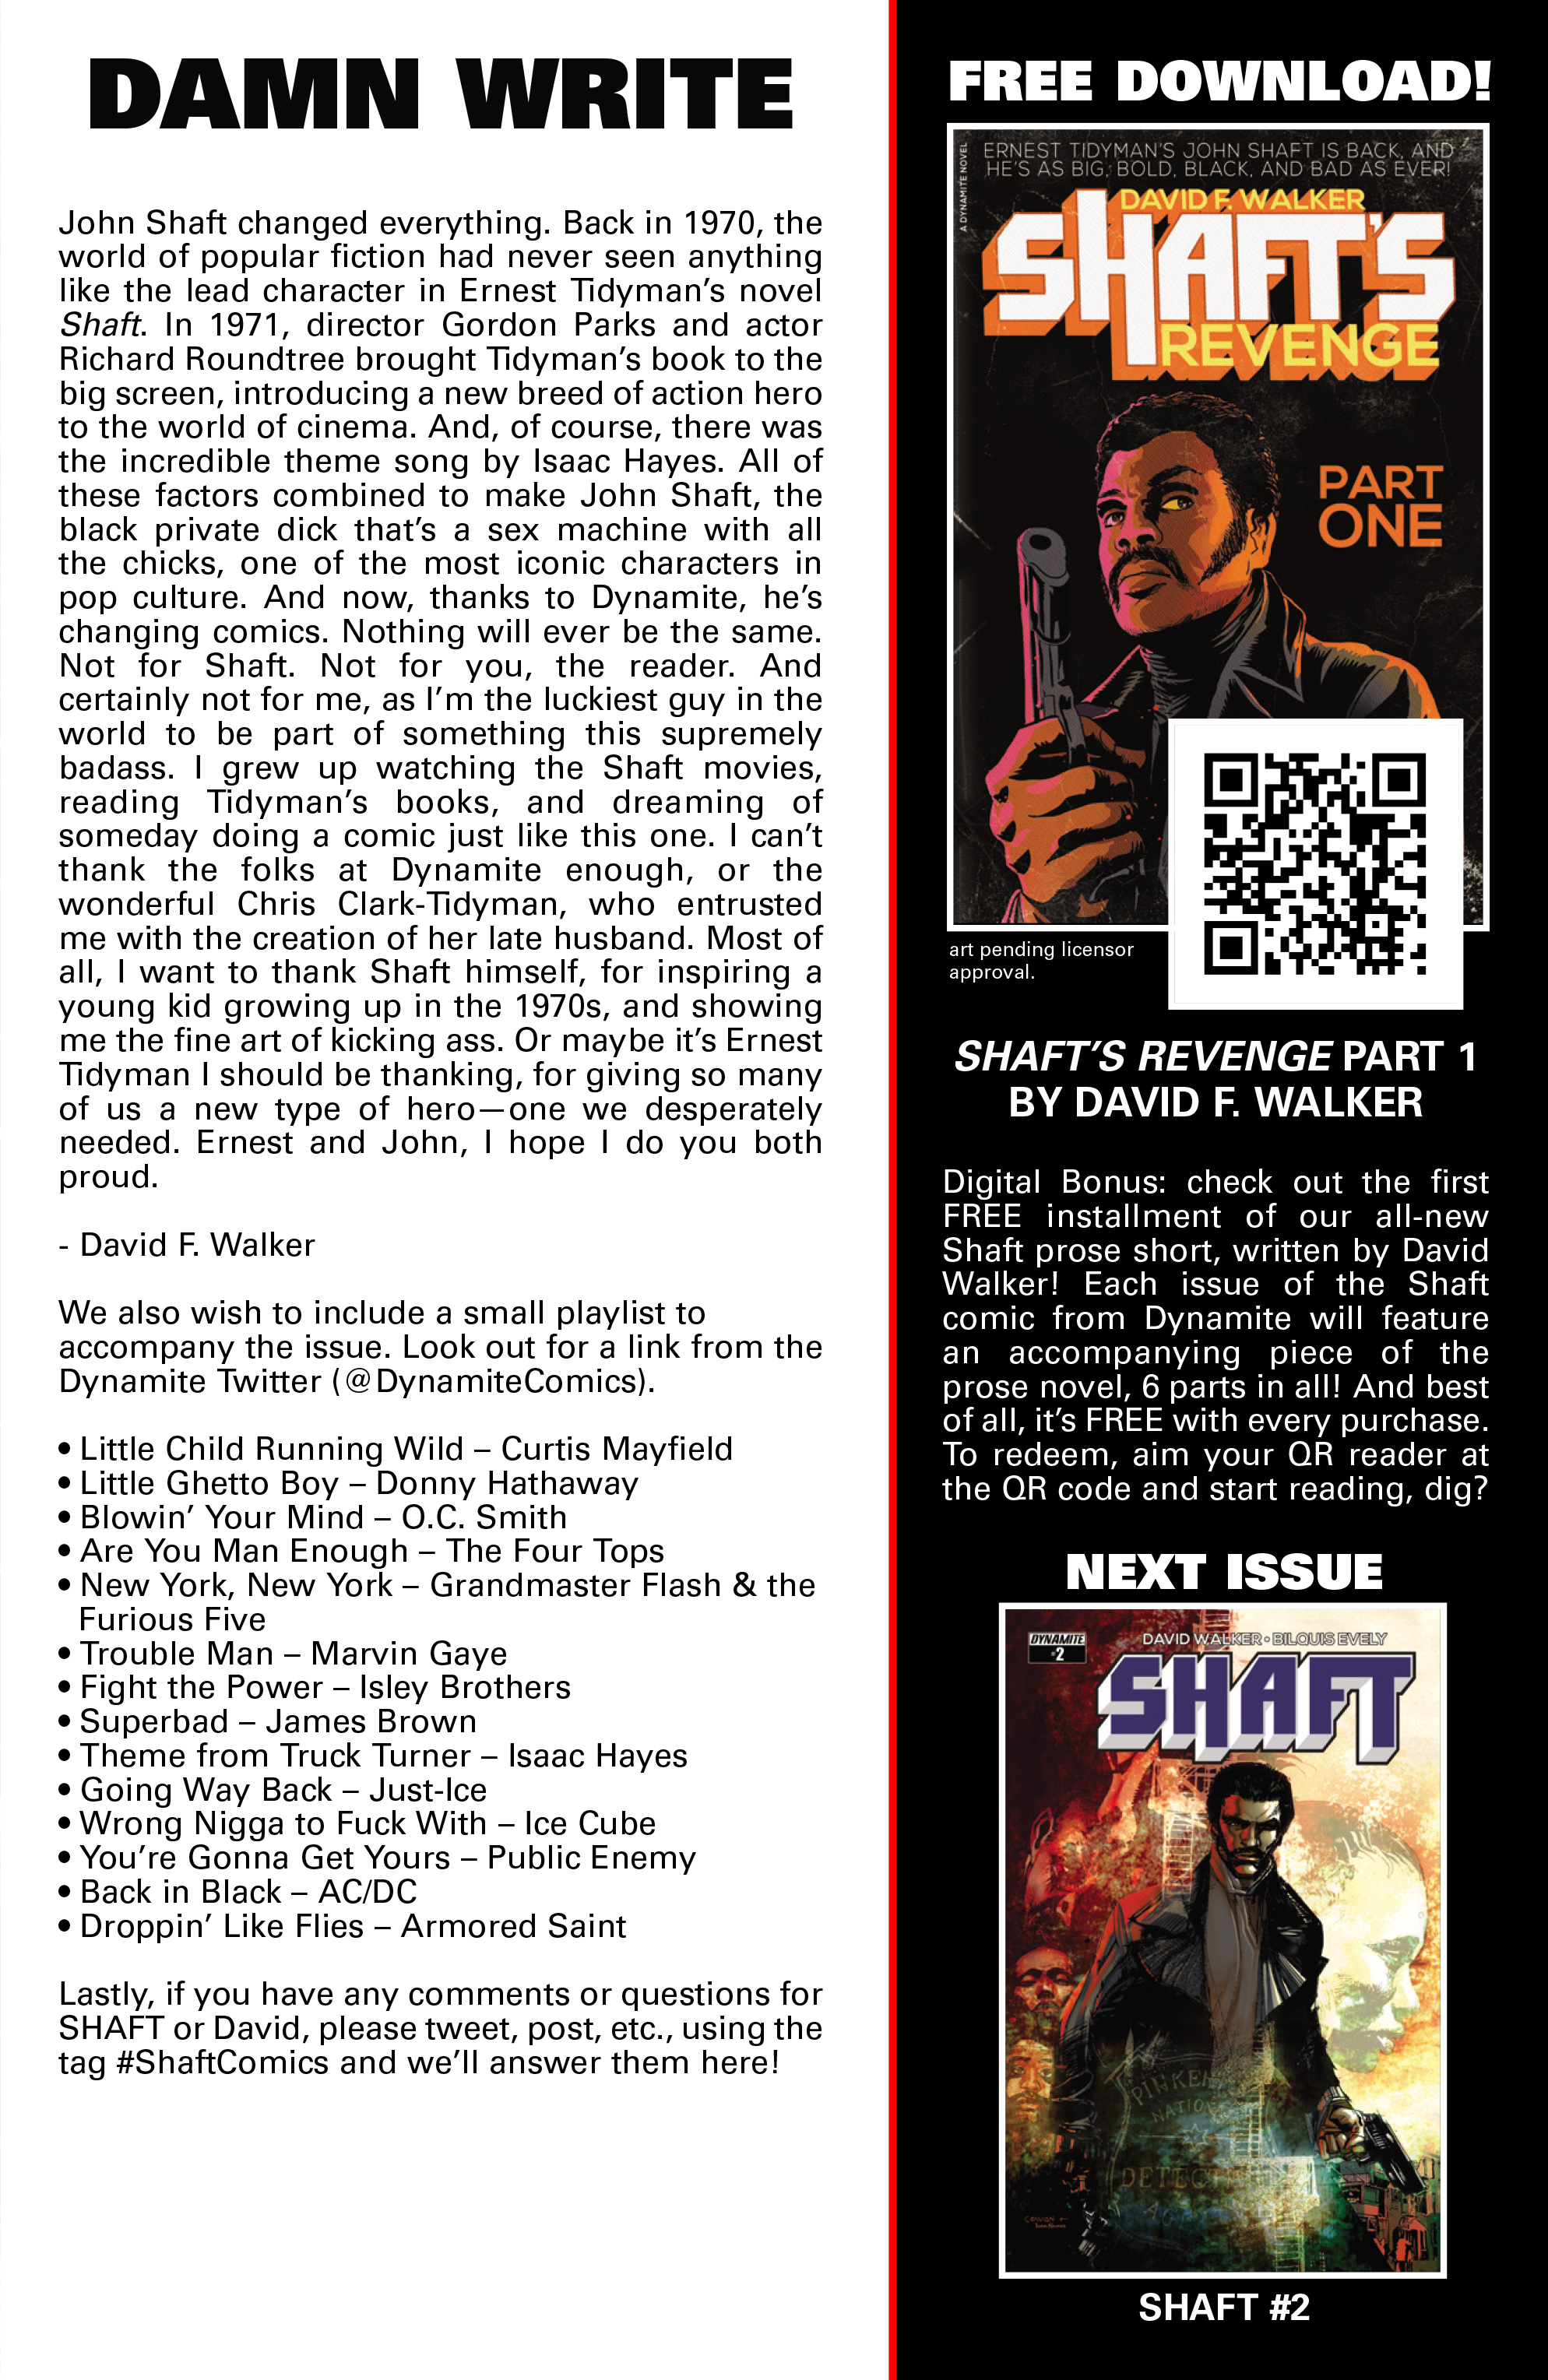 Read online Shaft comic -  Issue #1 - 29